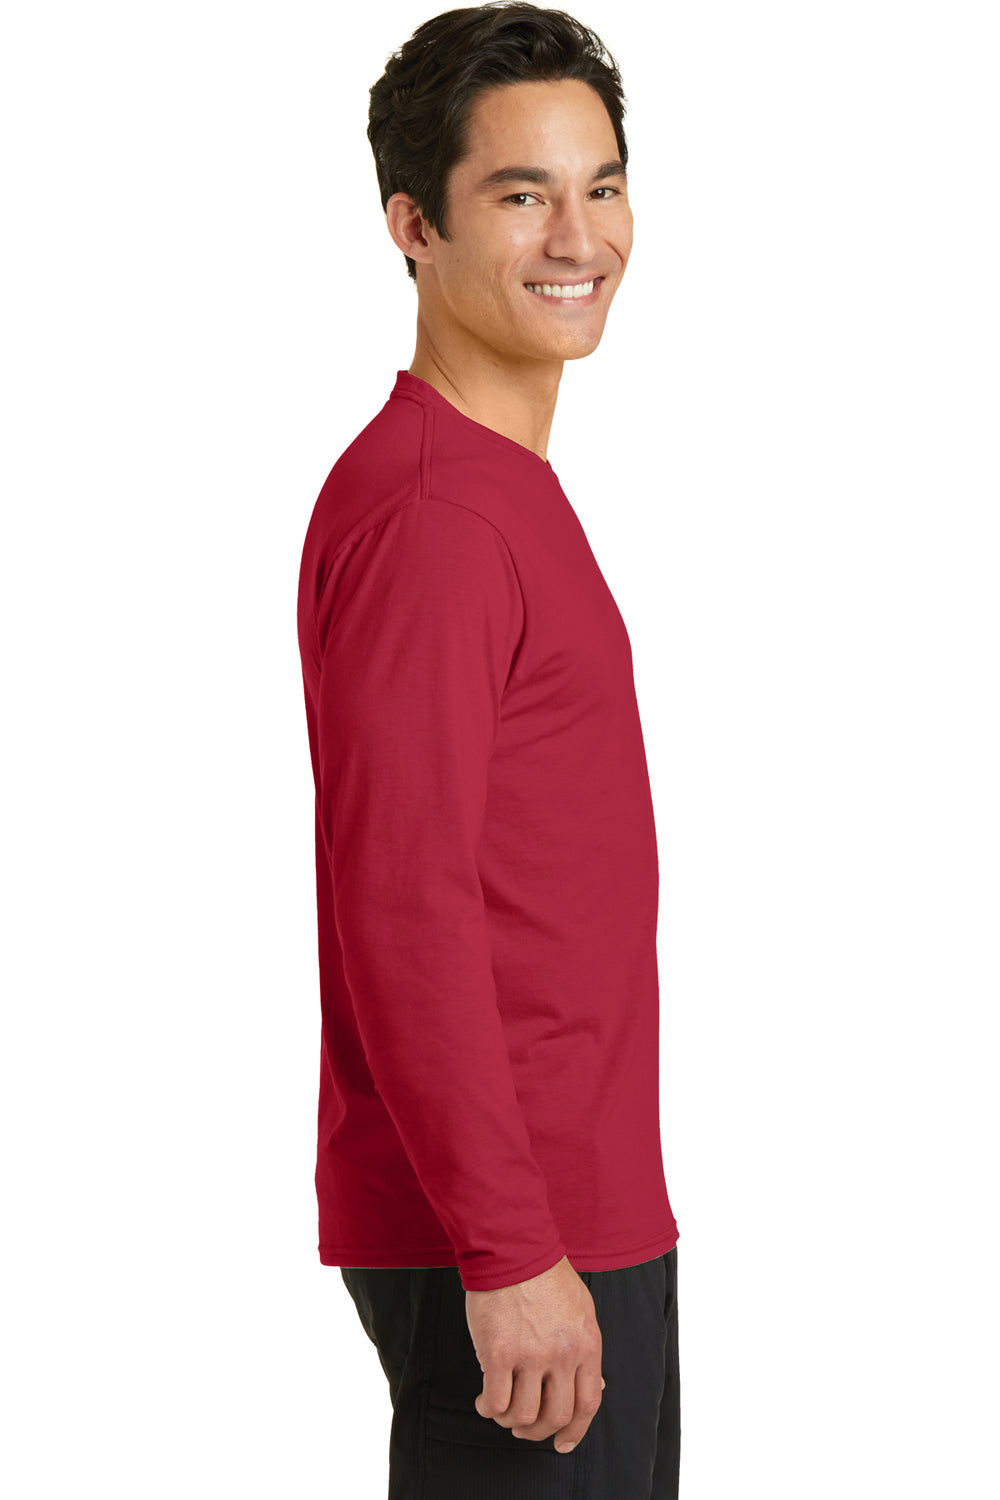 Port & Company PC381LS Mens Dry Zone Performance Moisture Wicking Long Sleeve Crewneck T-Shirt Red Side